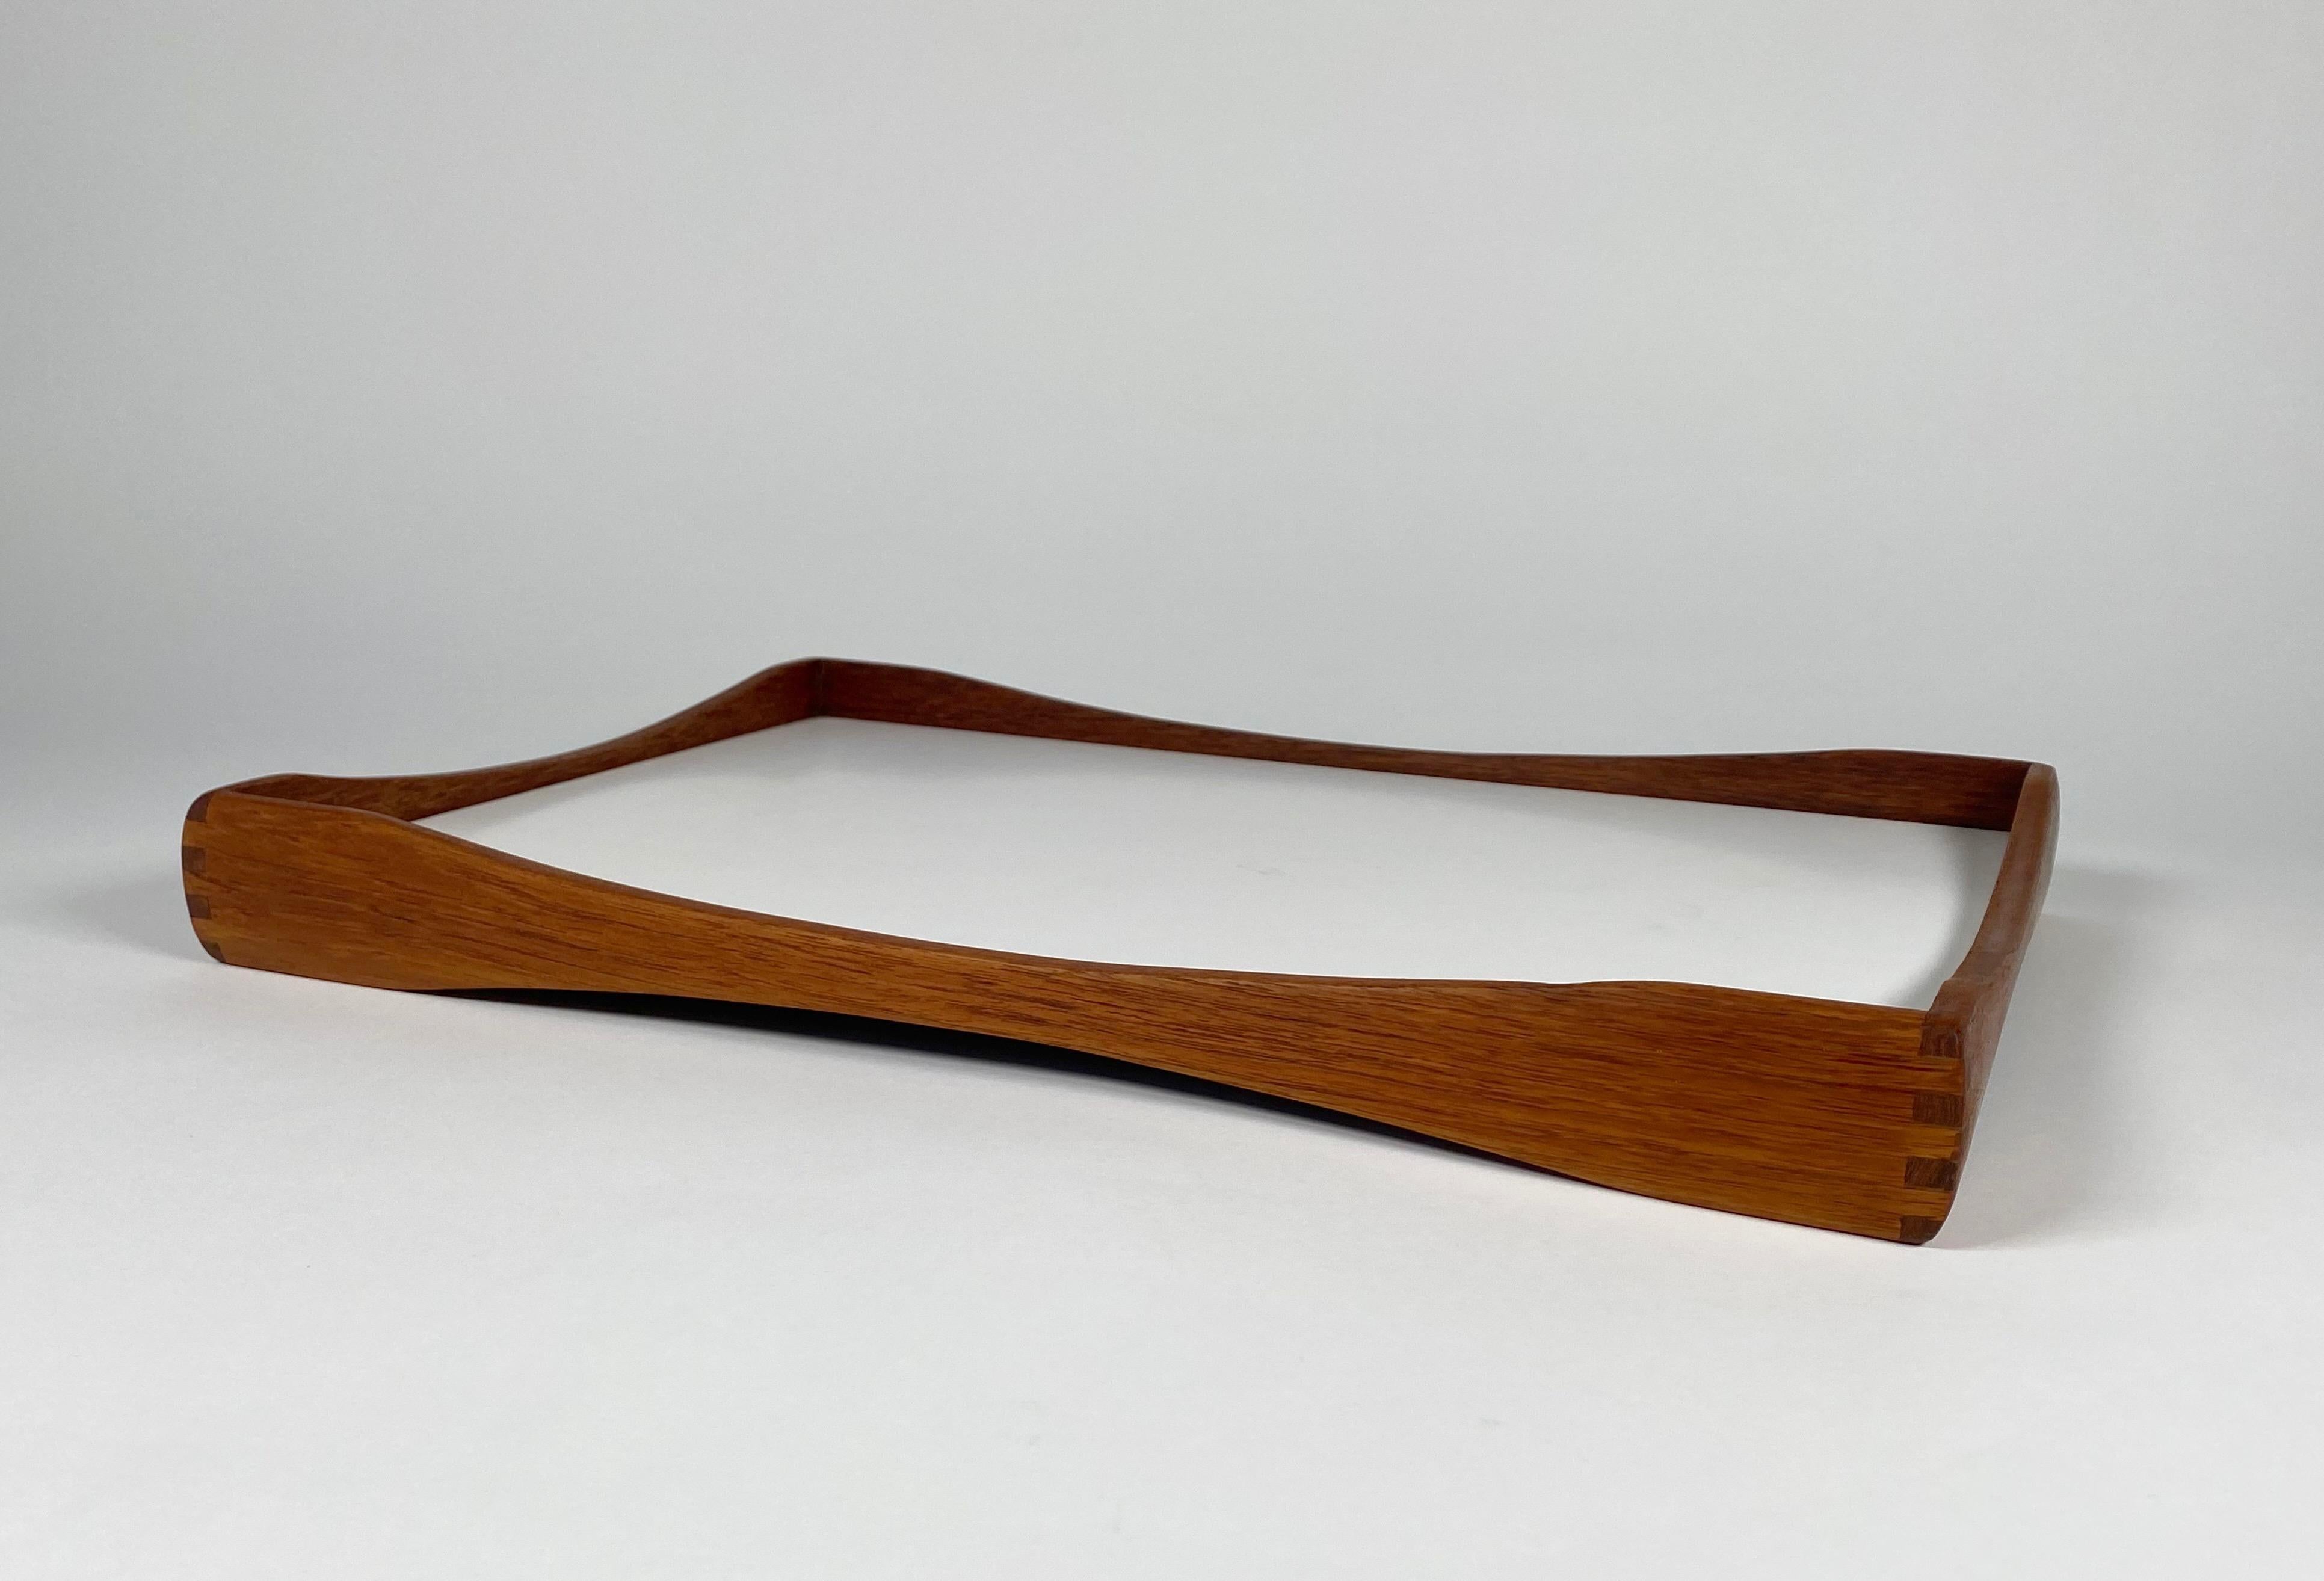 Hand-Crafted Finn Juhl Style Double Sided Tray in Teak & Laminate